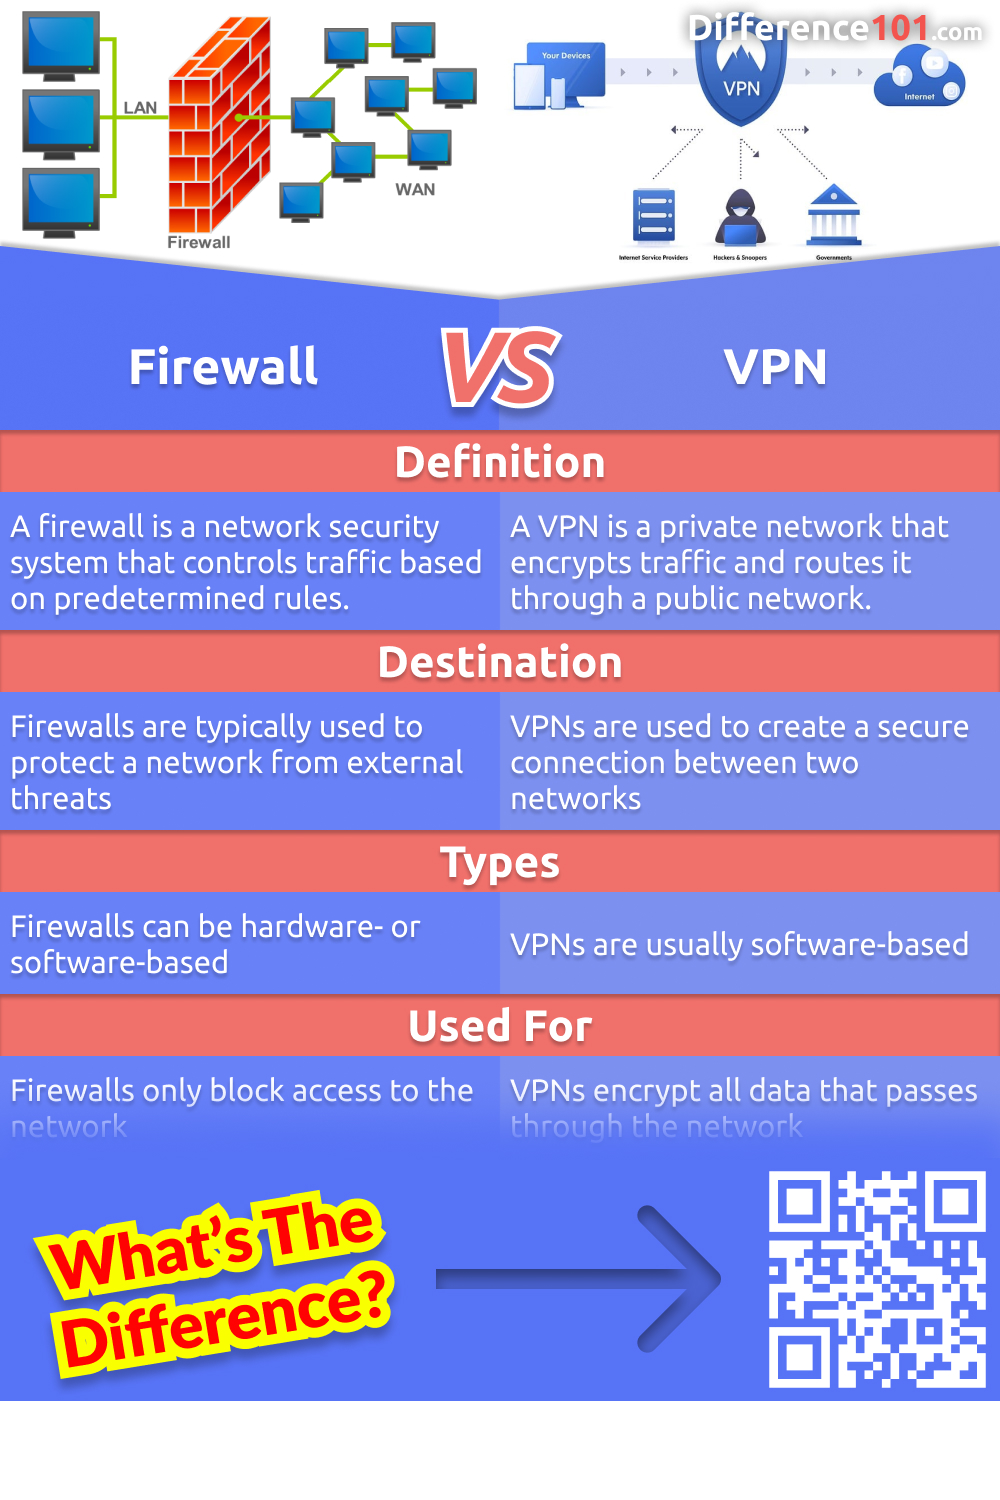 what is the difference between firewalls and vpns